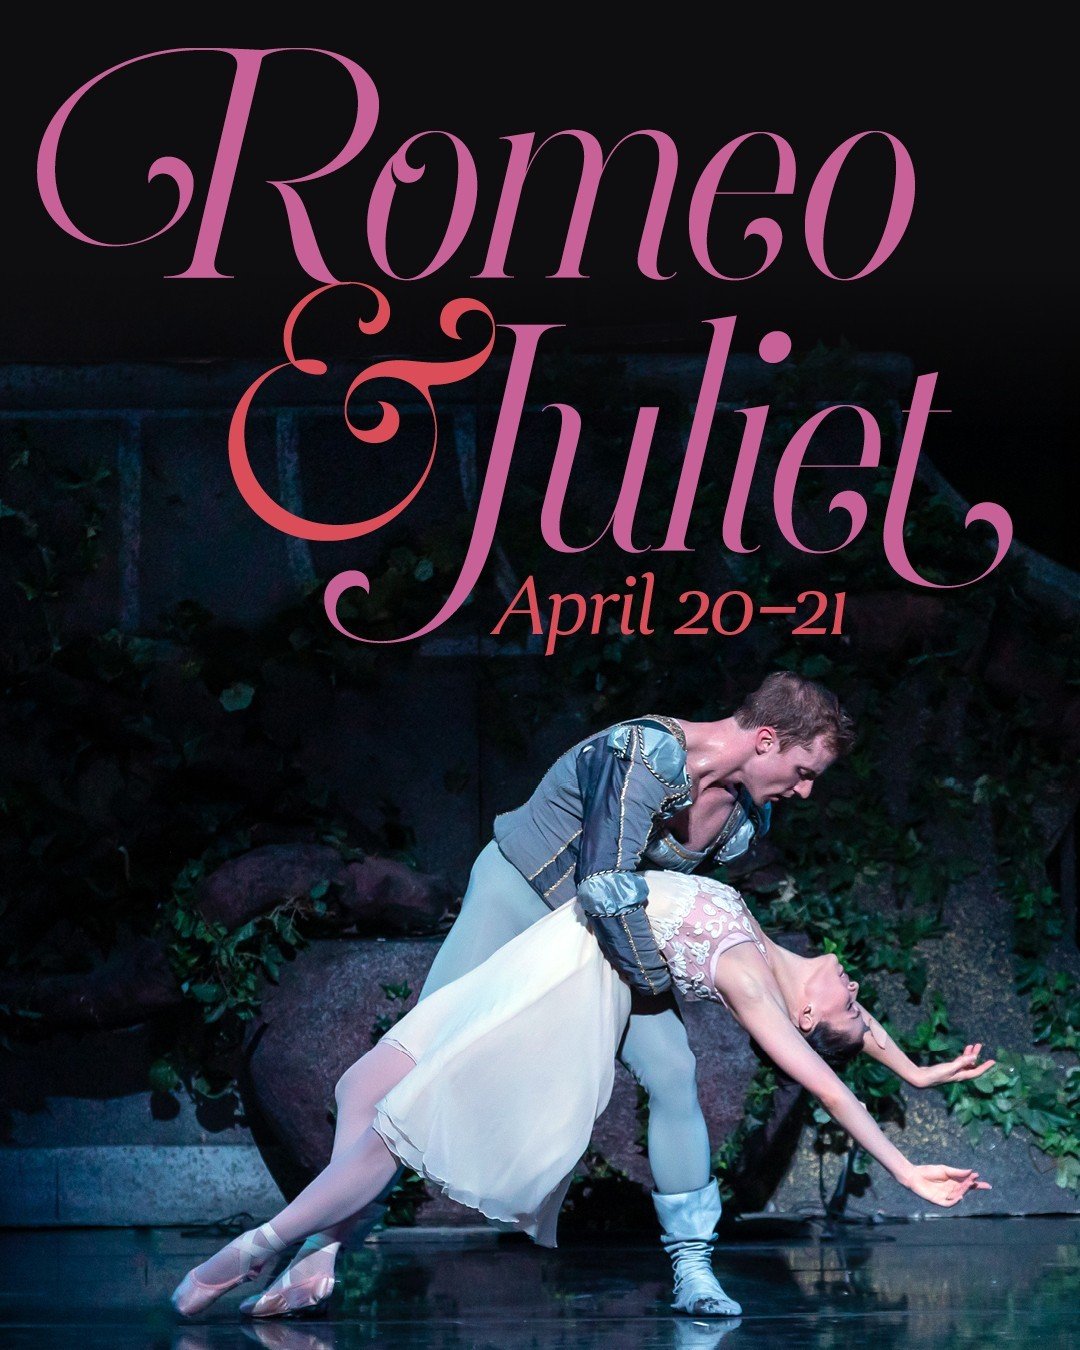 My favorite @NashvilleBallet wordmark of the season!⁠
⁠
Romeo and Juliet is a classic for a reason, and tickets are still available for this weekend. Don't miss out on sword fights, passion, and tragedy.⁠
⁠
I've been working overtime on the 24-25 sea